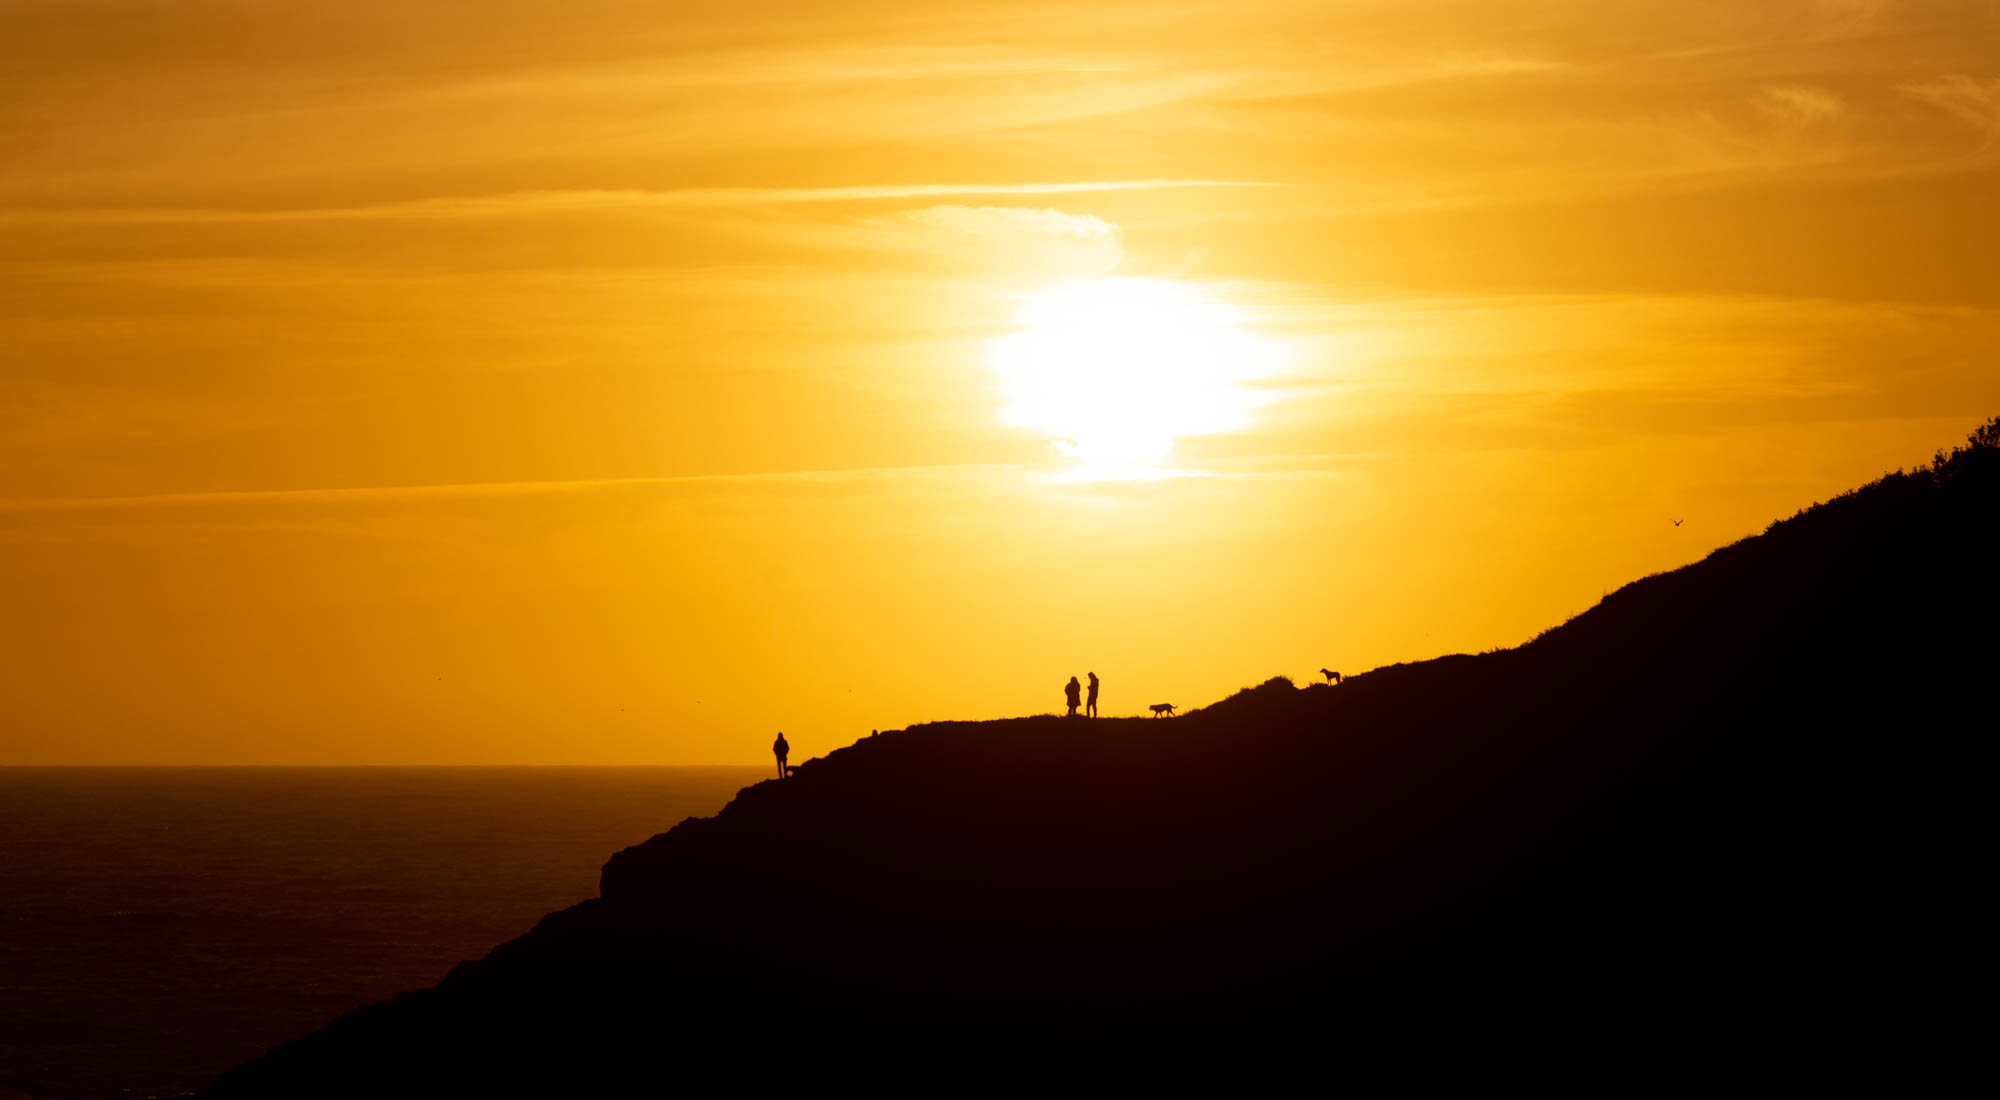 The sun sets over the ocean, with a couple of people walking their dogs on a hill in the foreground